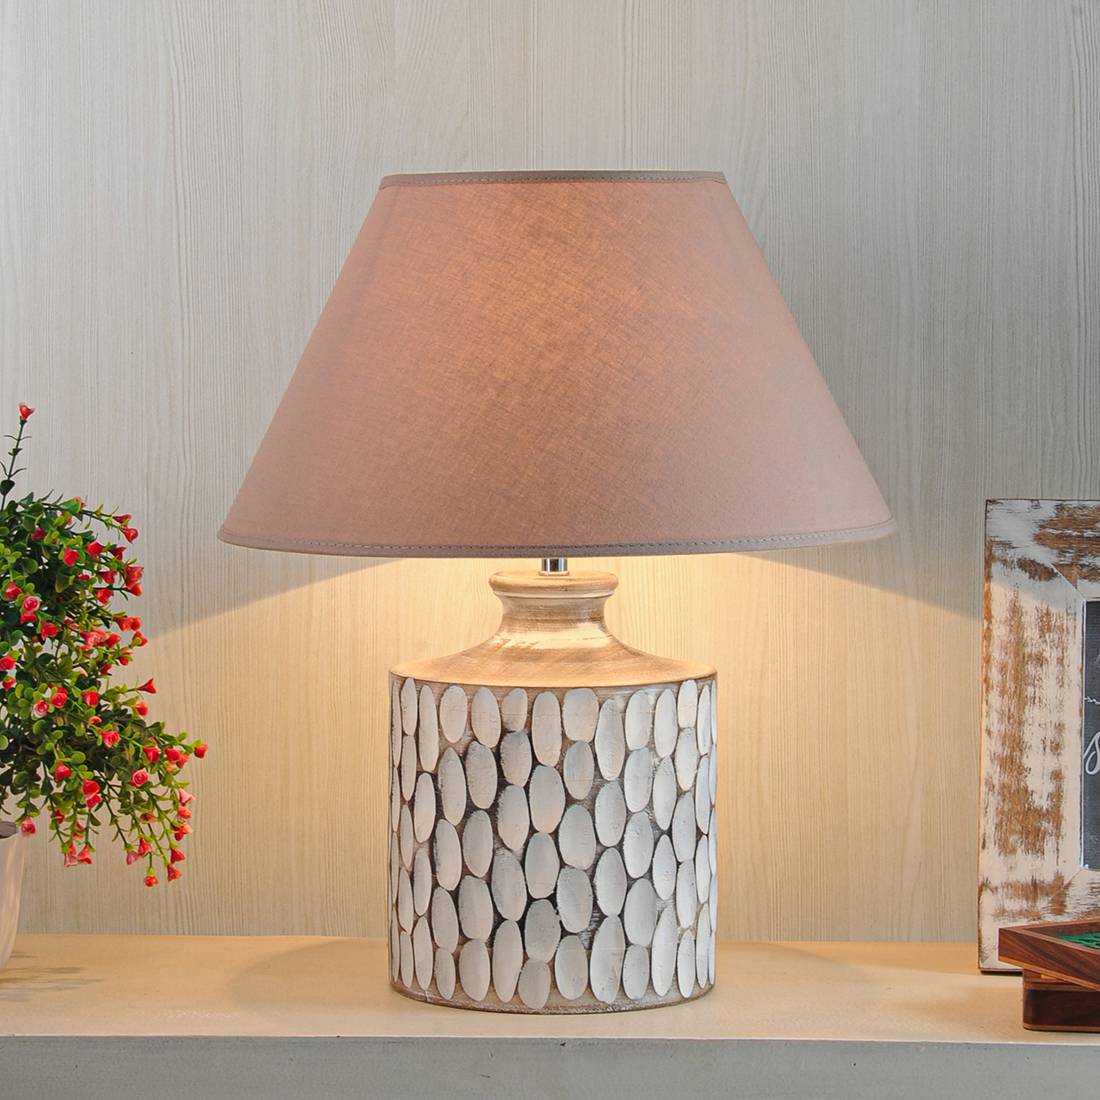 Table Lamp Lamps, Nature Themed Table Lamps